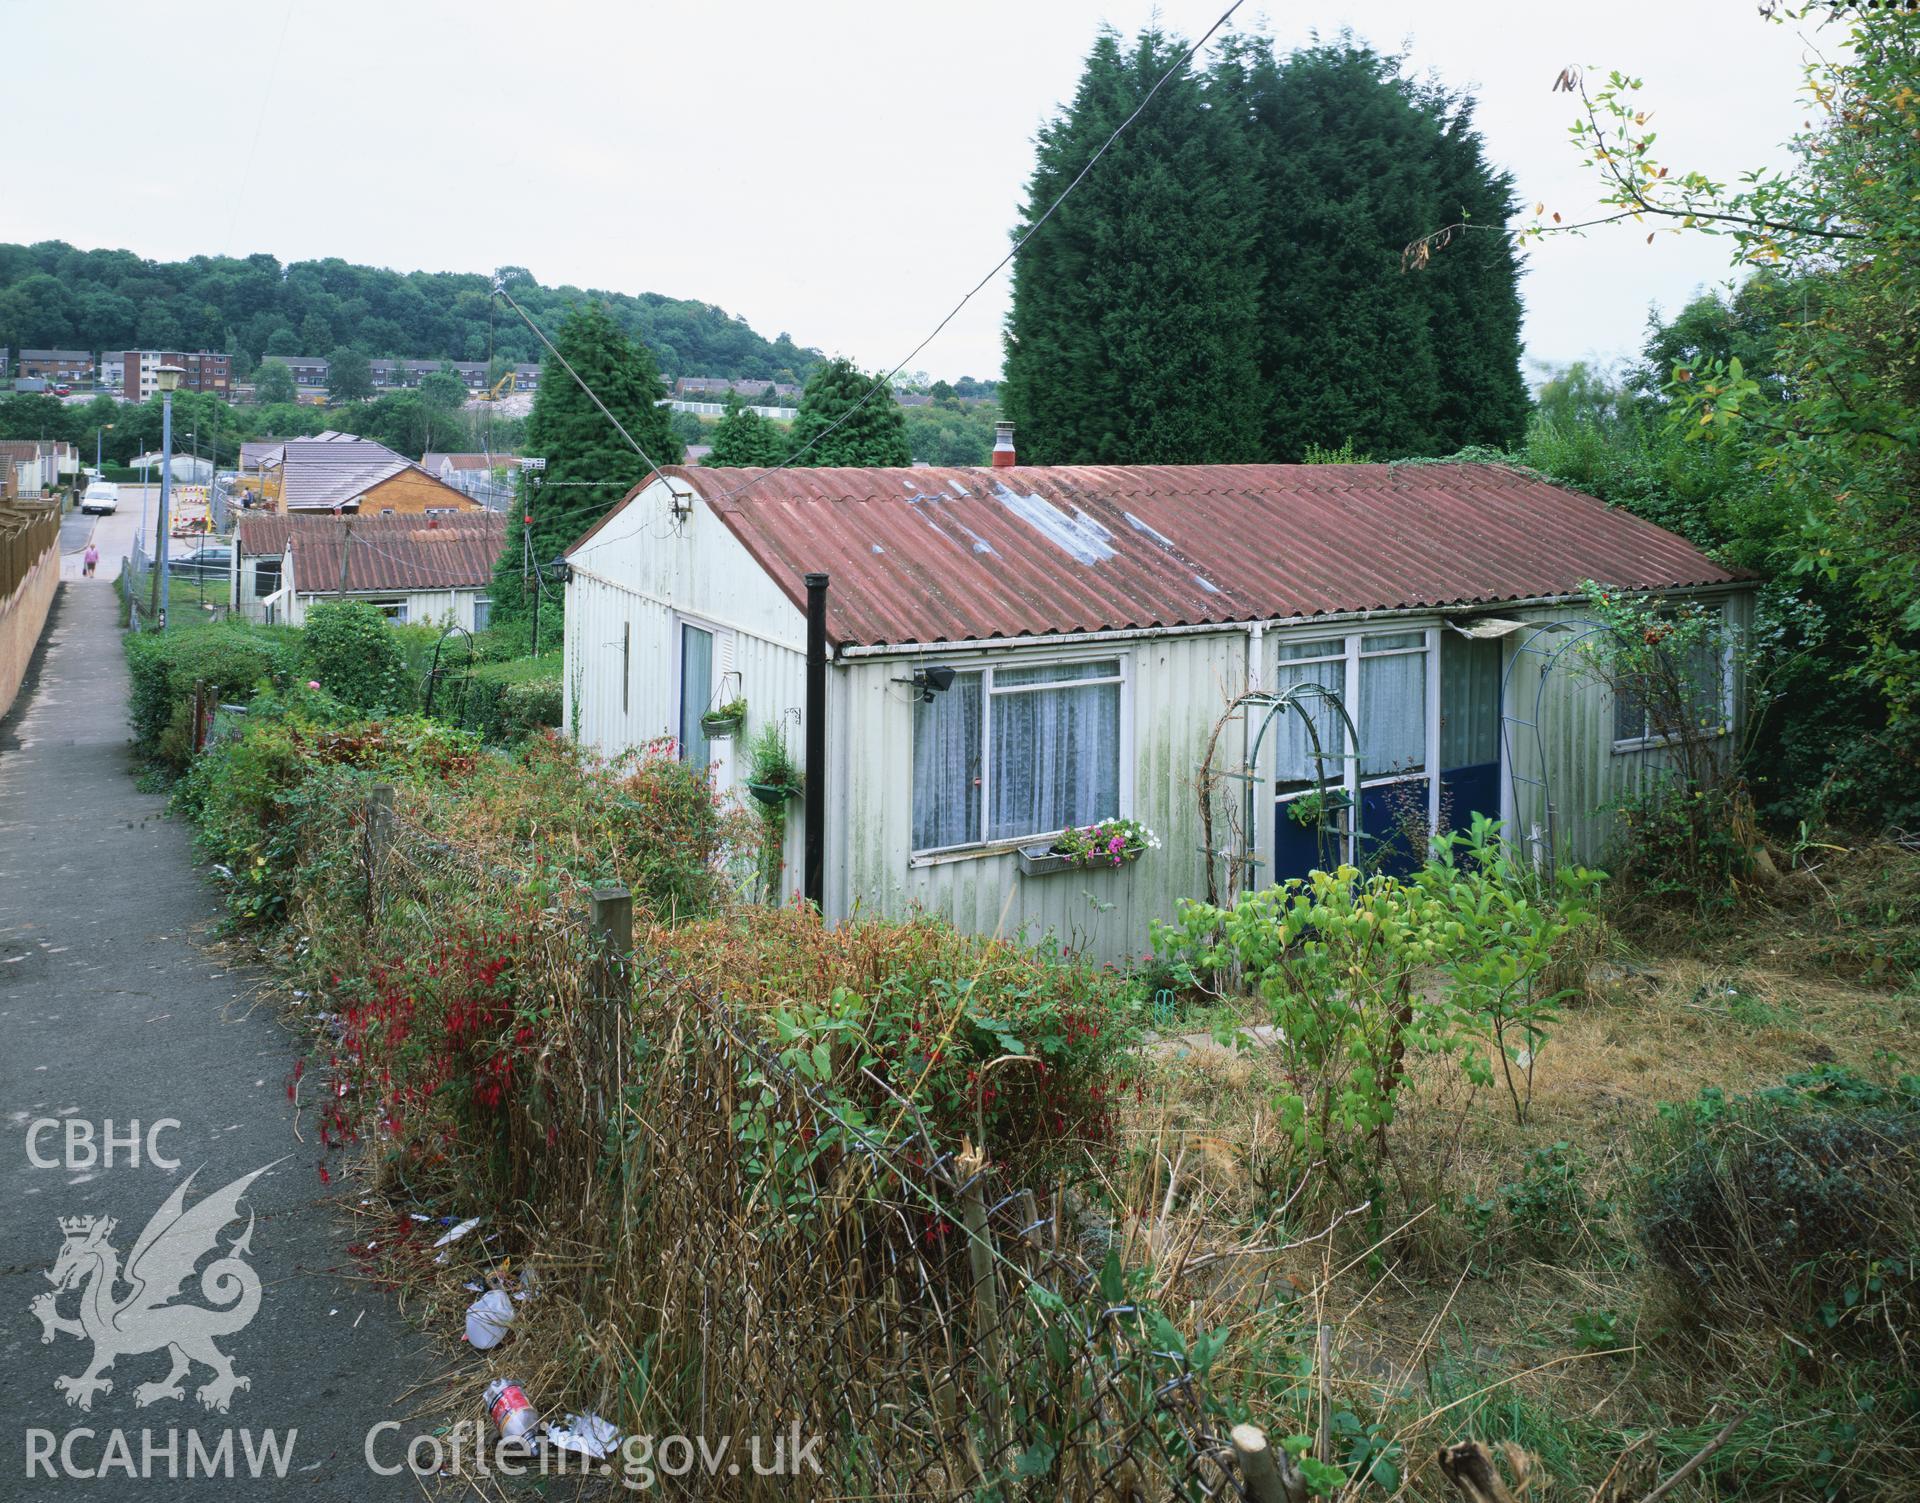 RCAHMW colour transparency showing exterior view of prefabricated buildings on the Bishpool Estate, Newport taken by I.N. Wright, September 2003.